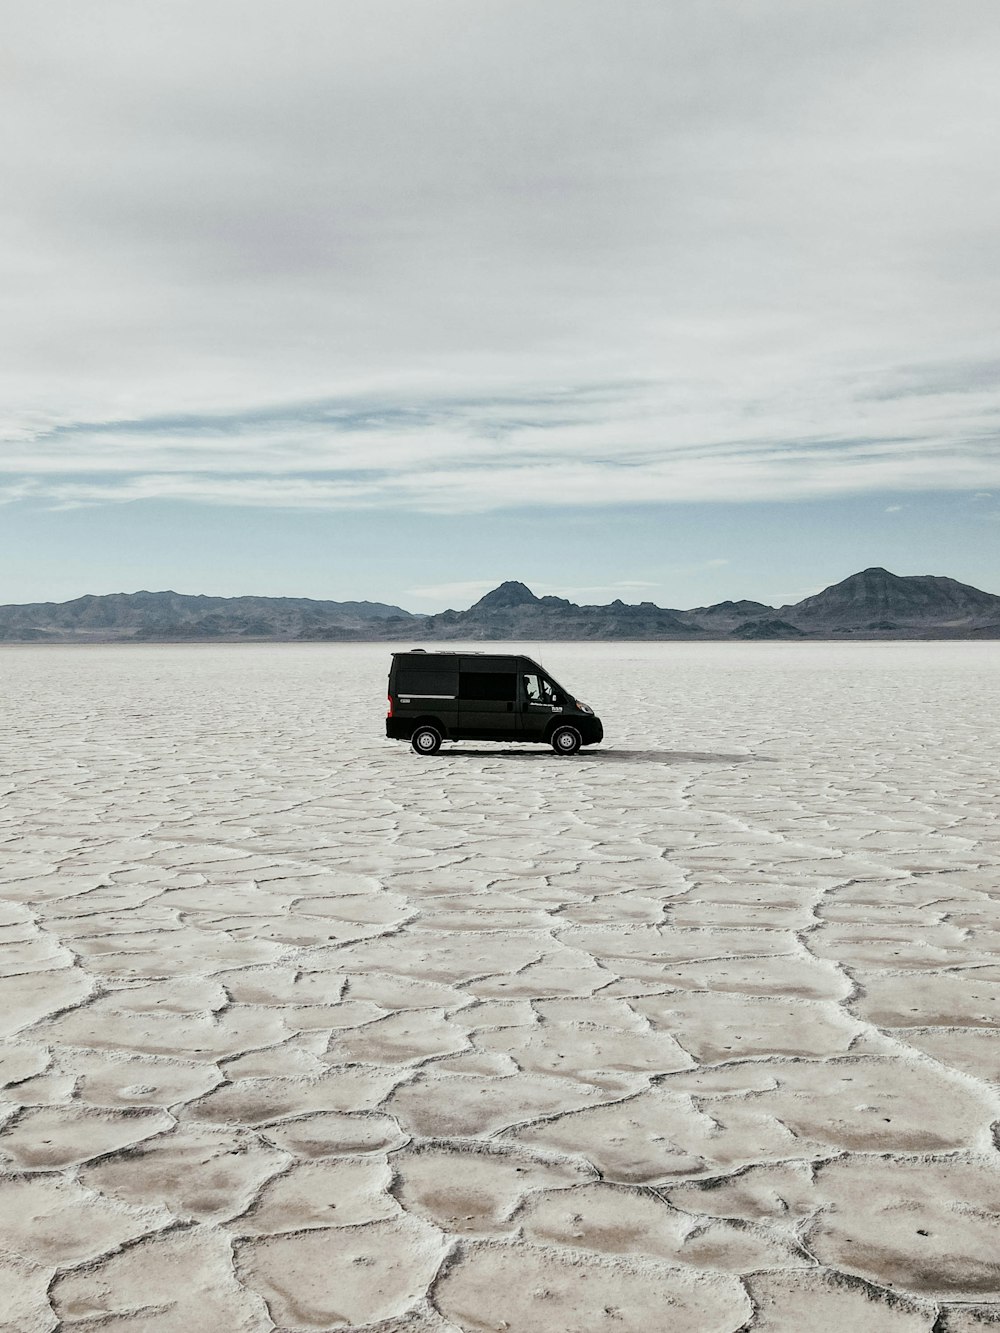 a van is parked in the middle of the desert